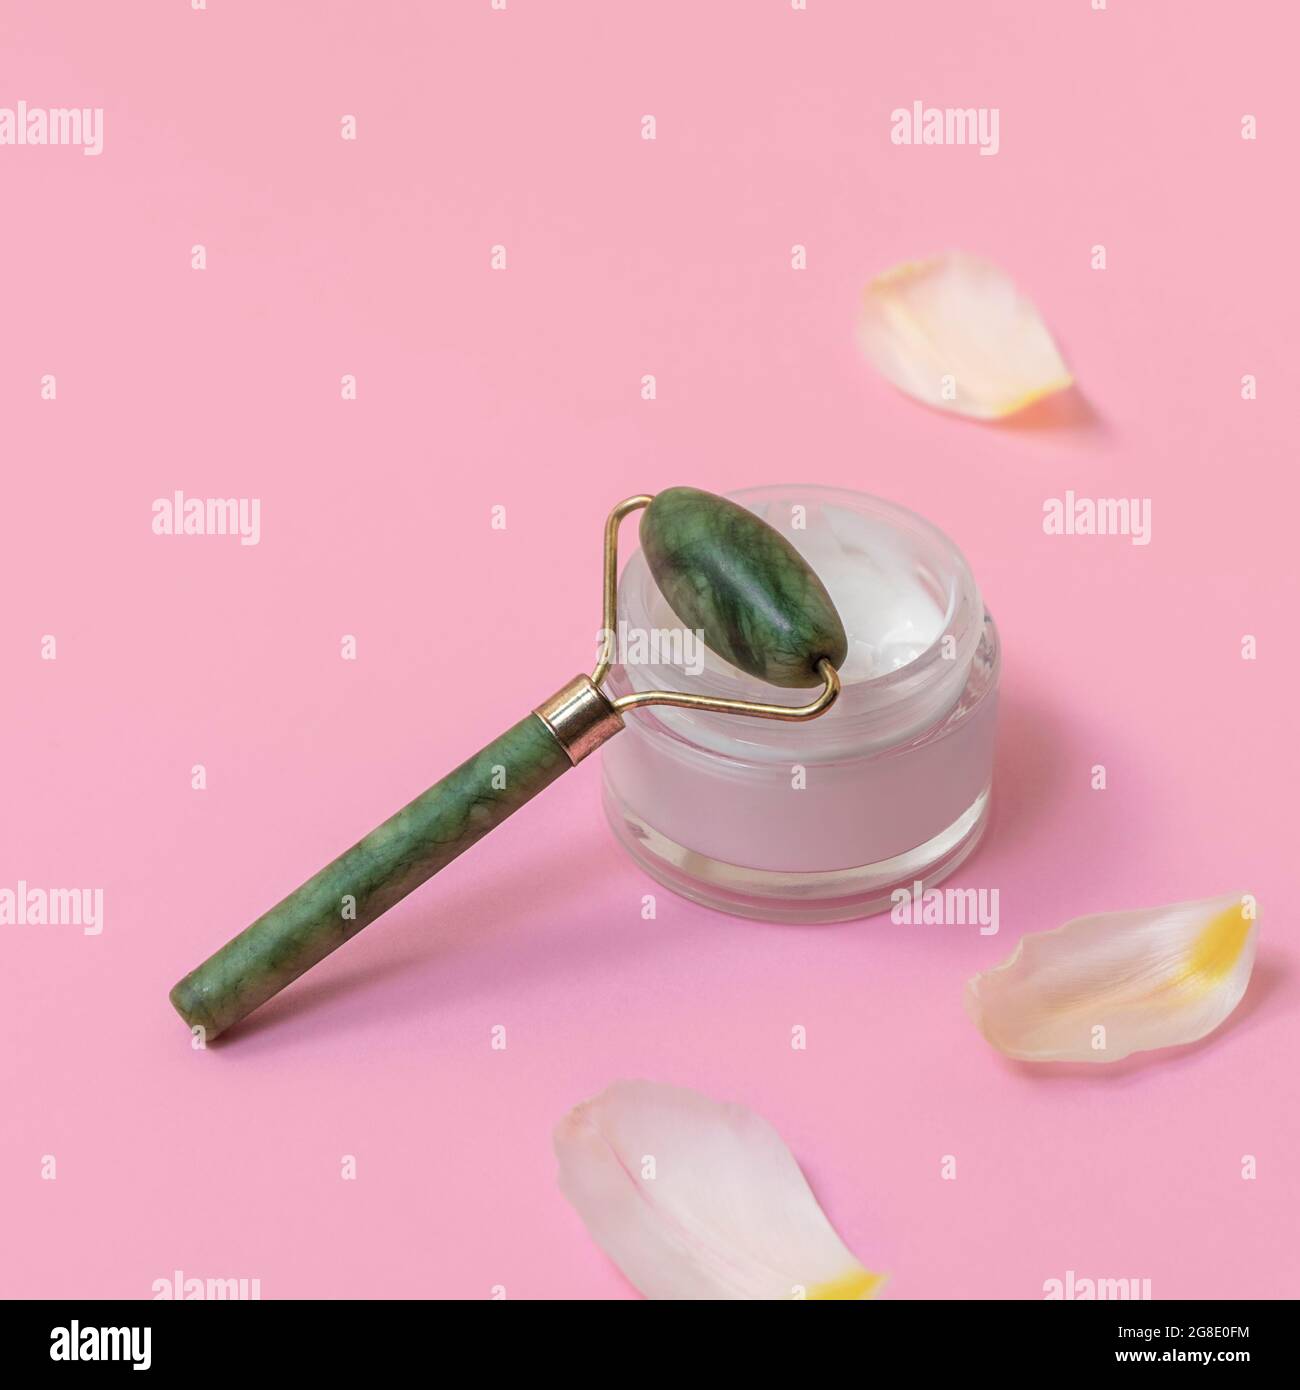 Jade roller facial massage with face cream on pastel pink background with white petals Stock Photo